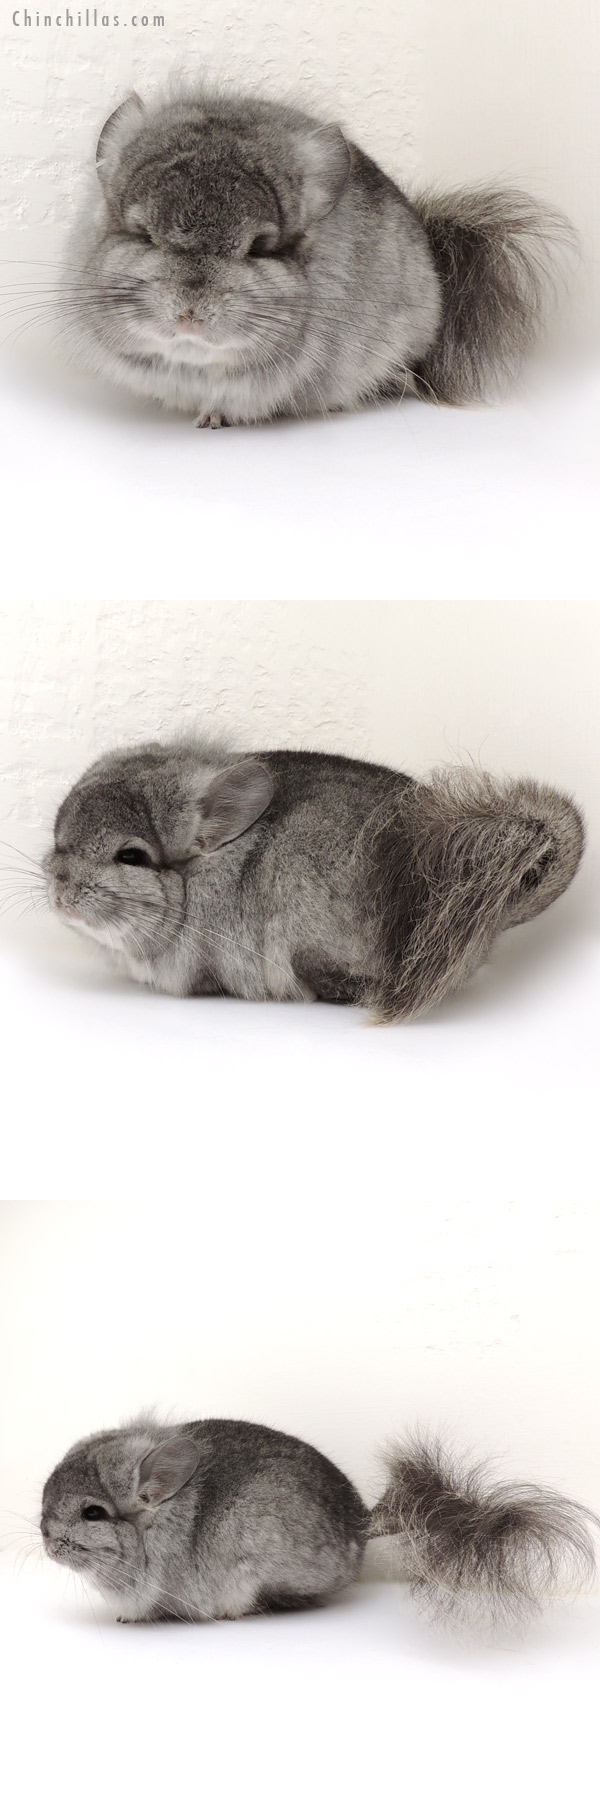 Chinchilla or related item offered for sale or export on Chinchillas.com - 14079 Exceptional Standard  Royal Persian Angora Male Chinchilla